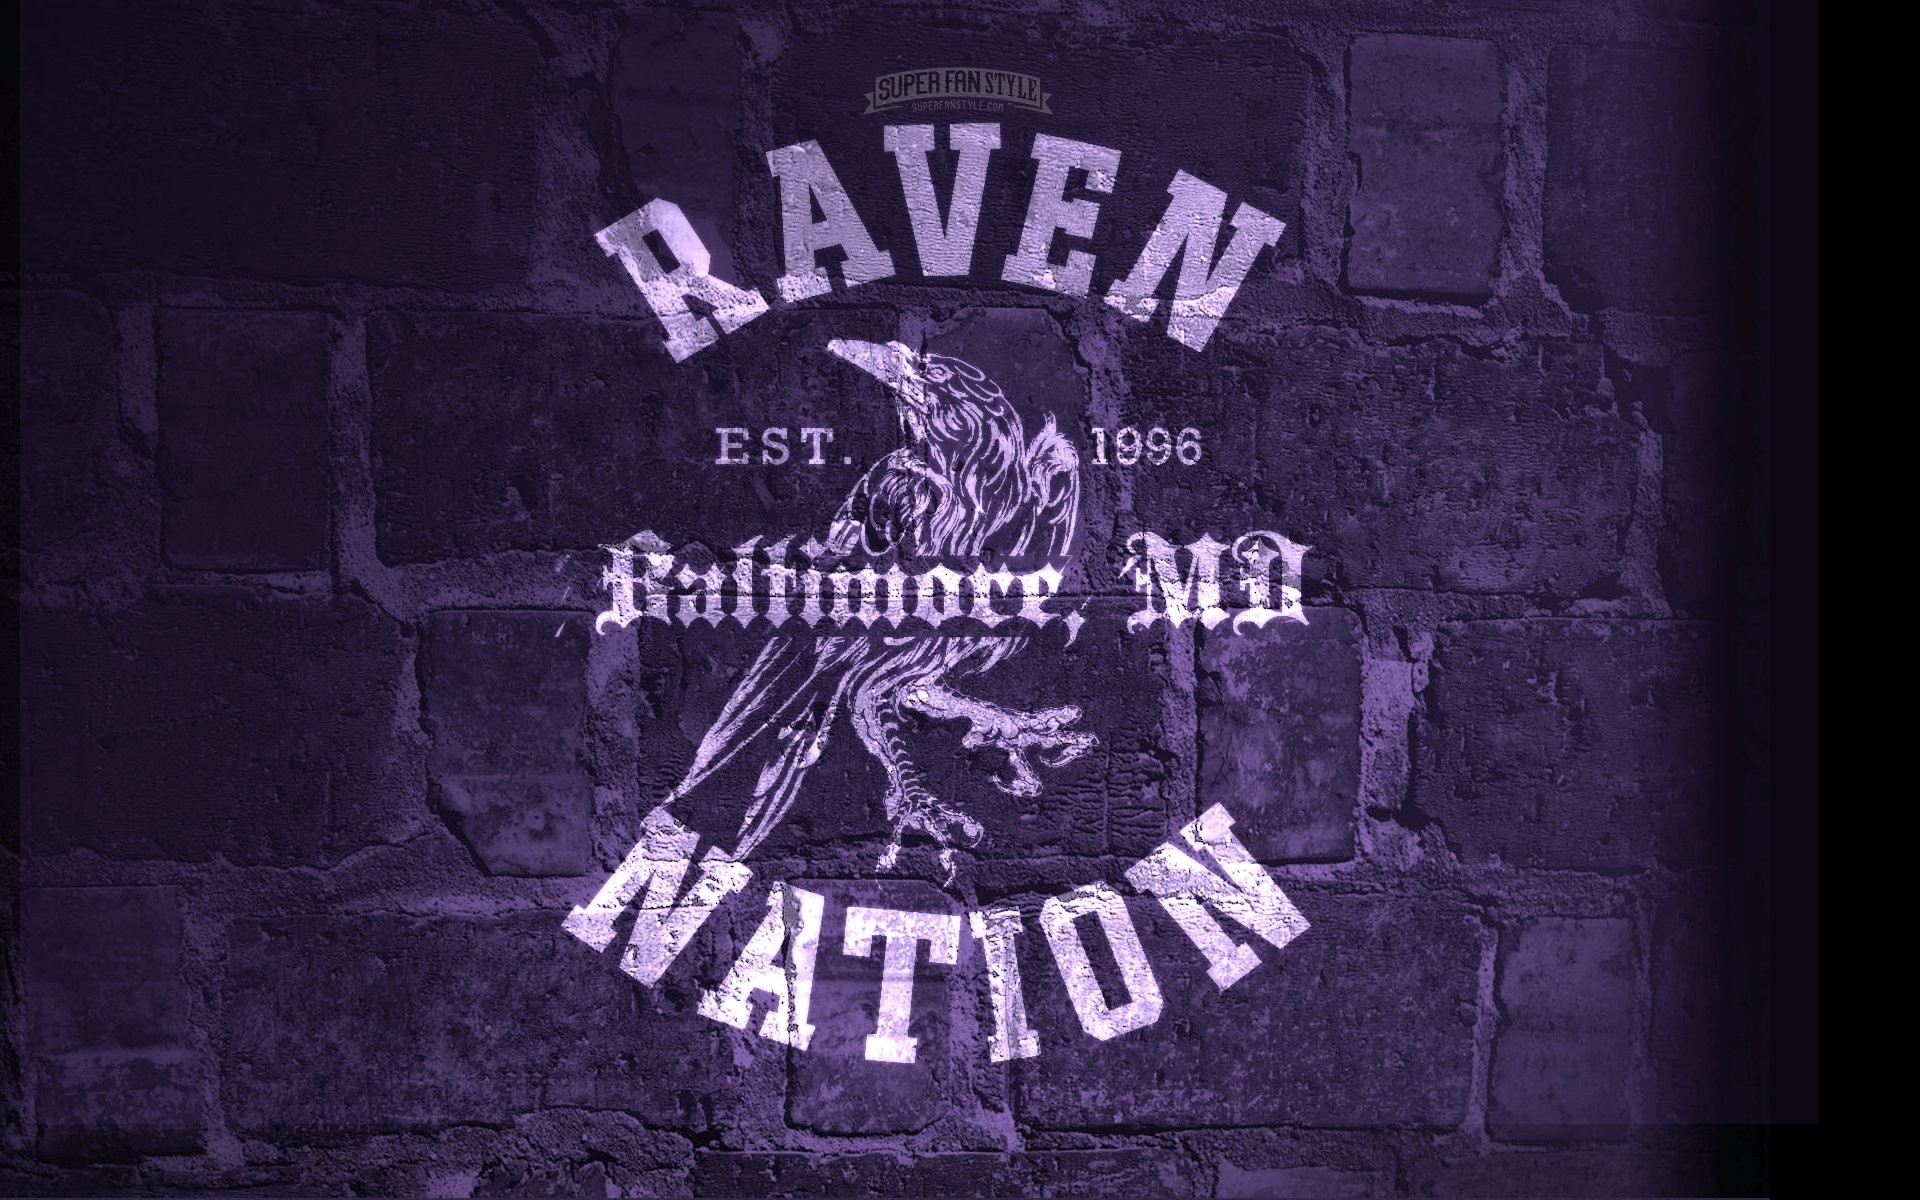 Ravens And Orioles Wallpaper (64+ images)